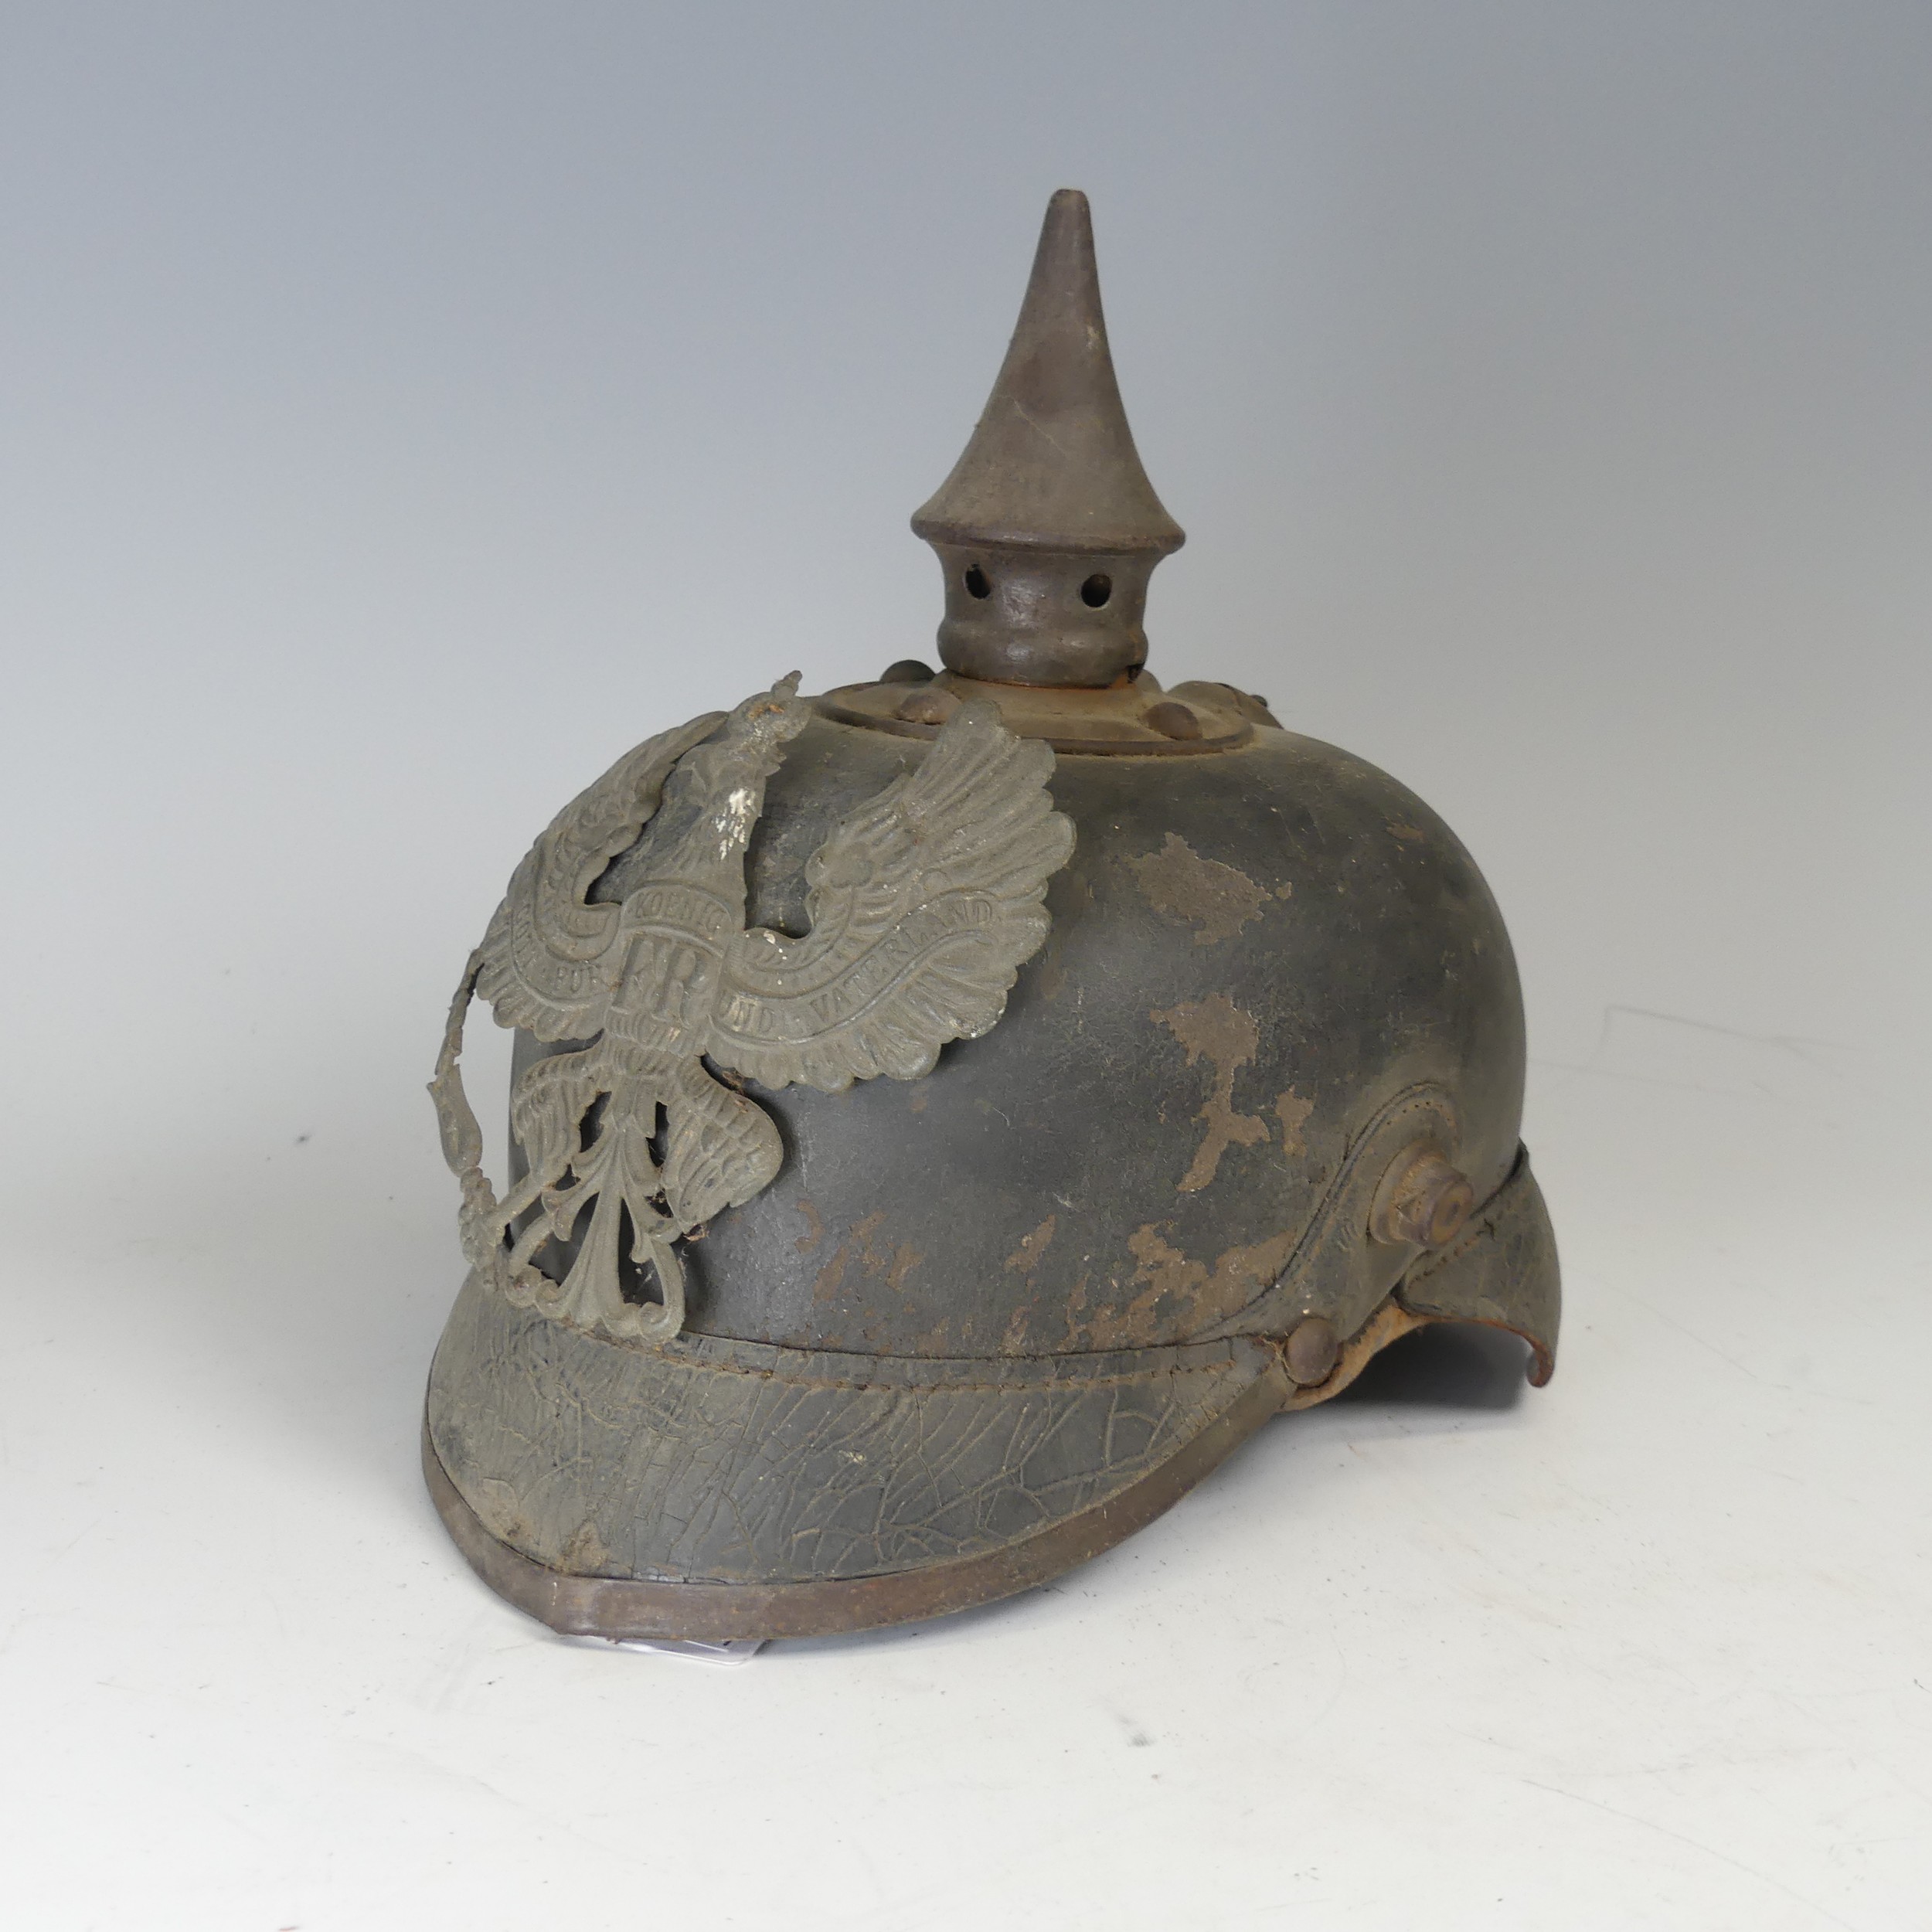 A WWI / Boer period Imperial German Prussian Pickelhaube Helmet, of leather construction, with brass